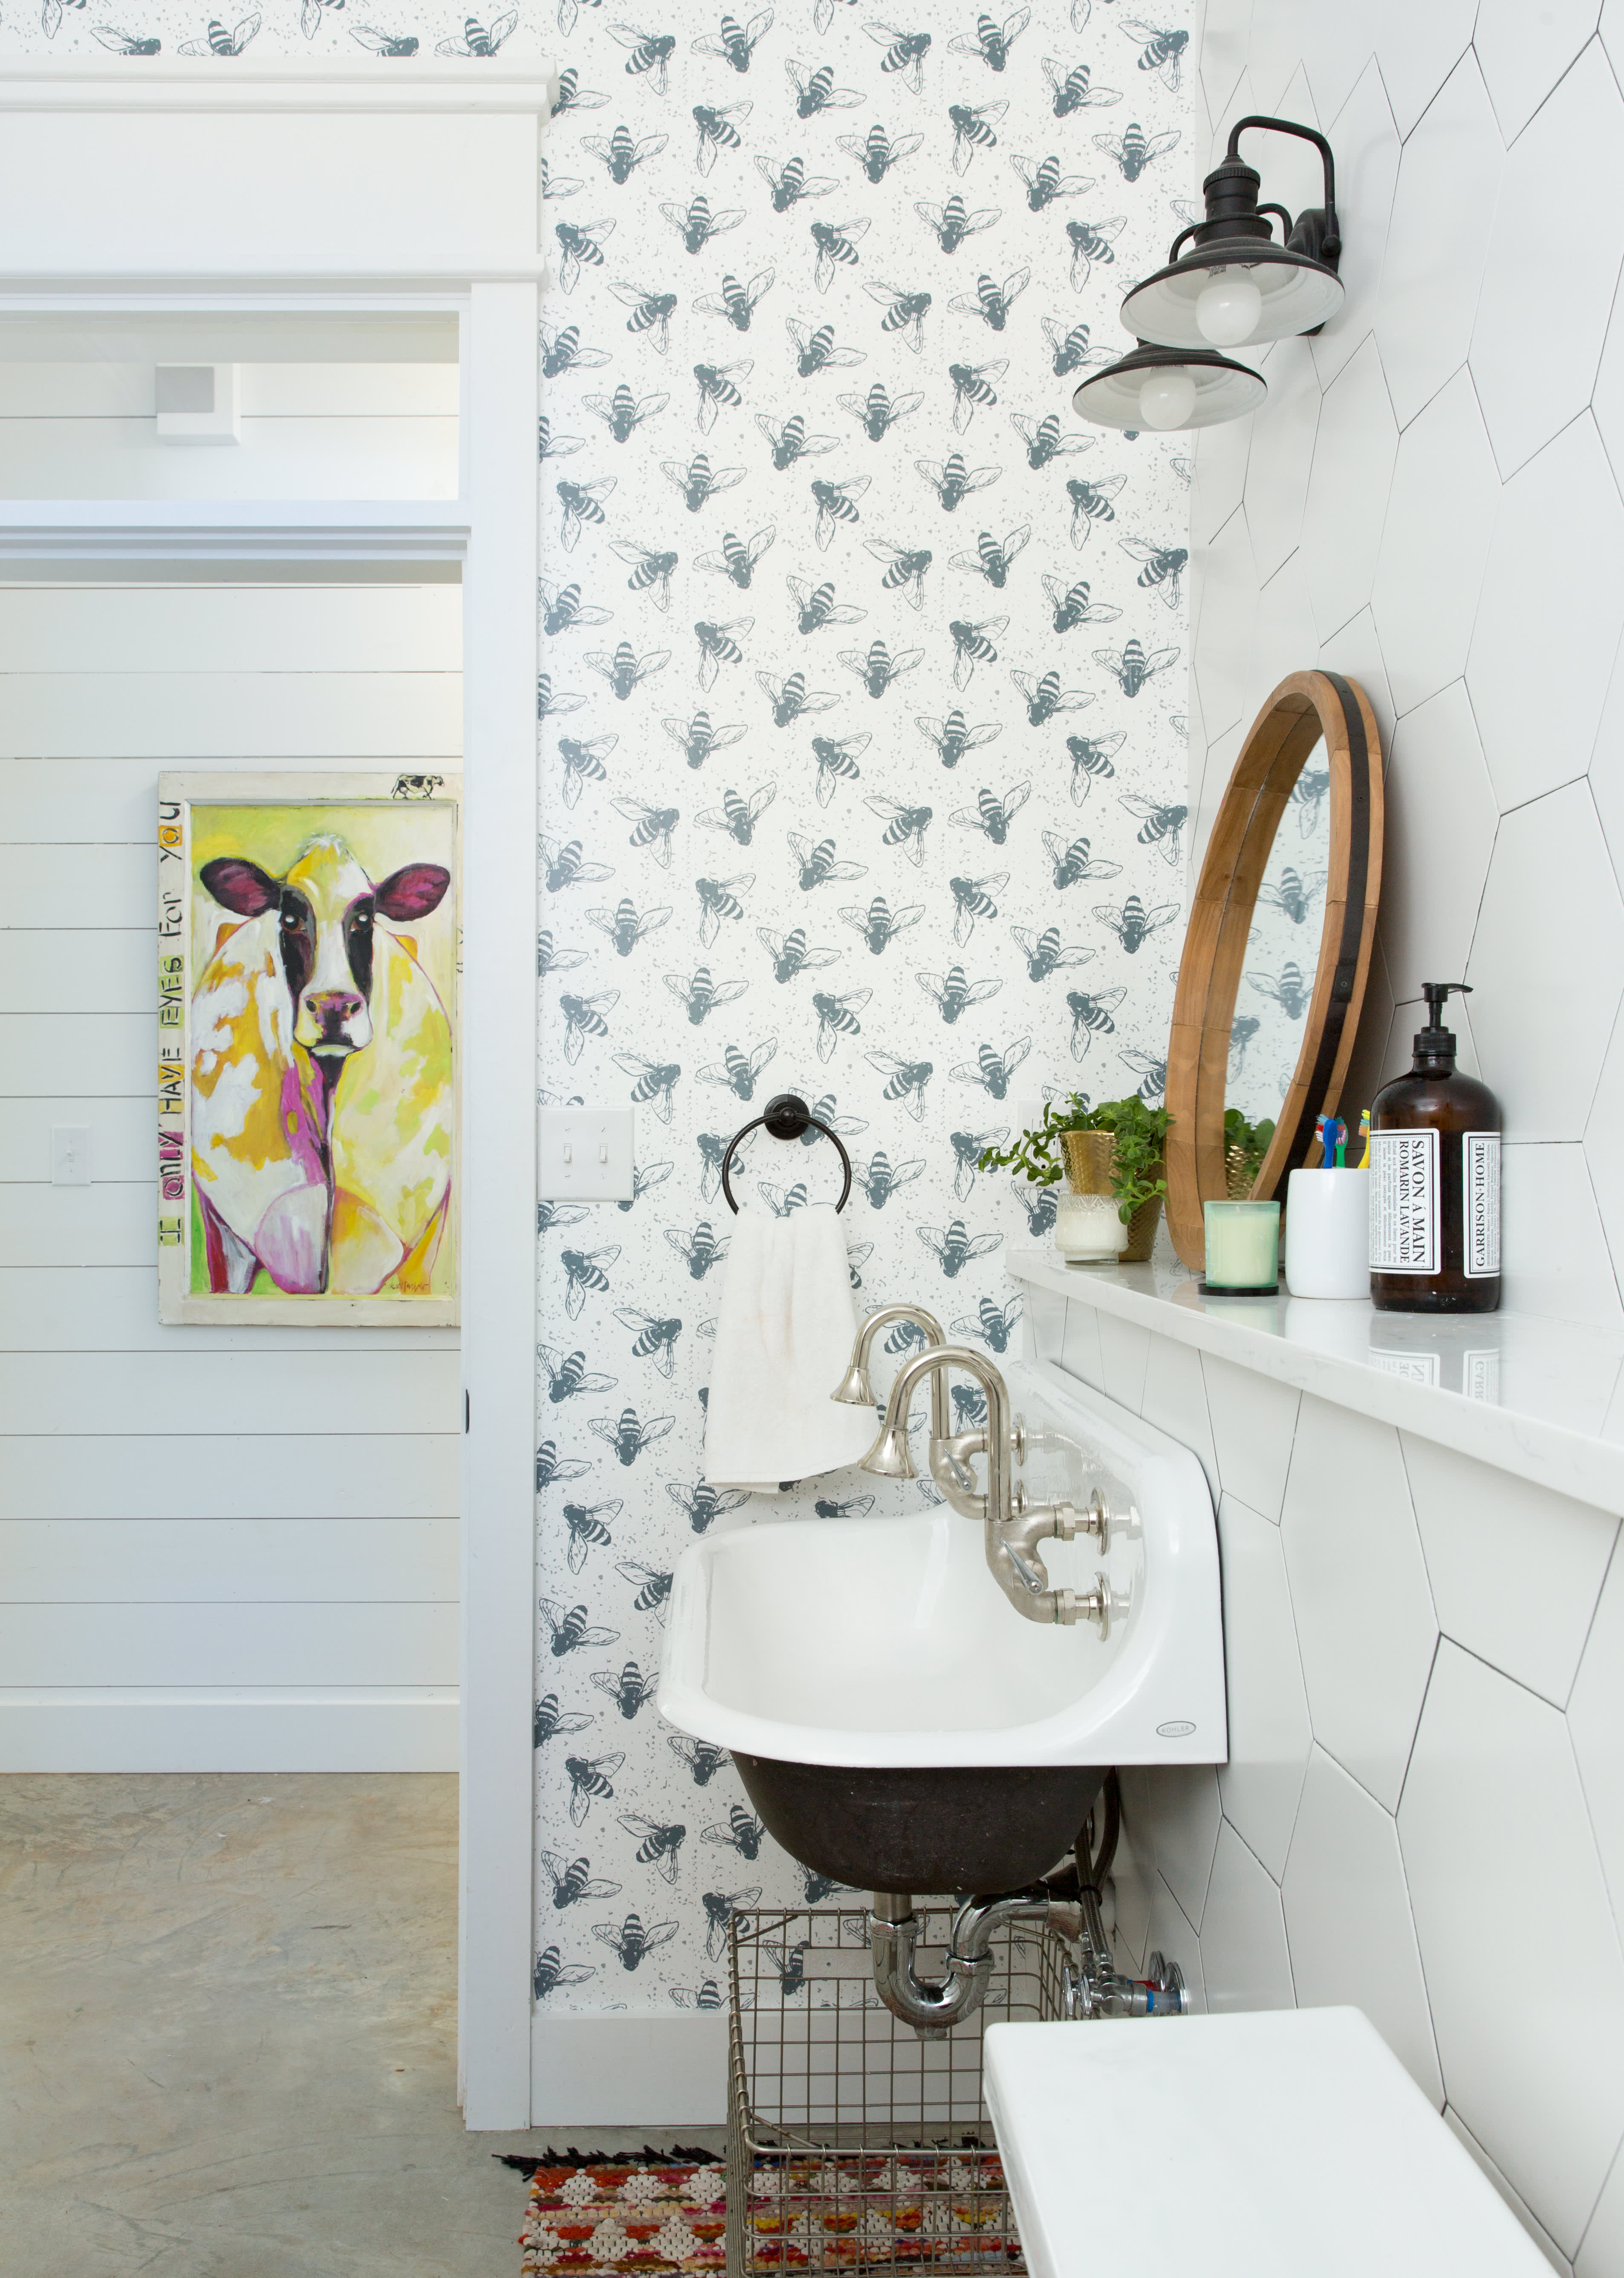 7 Things in the Bathroom You Should Get Rid of Before an Open House